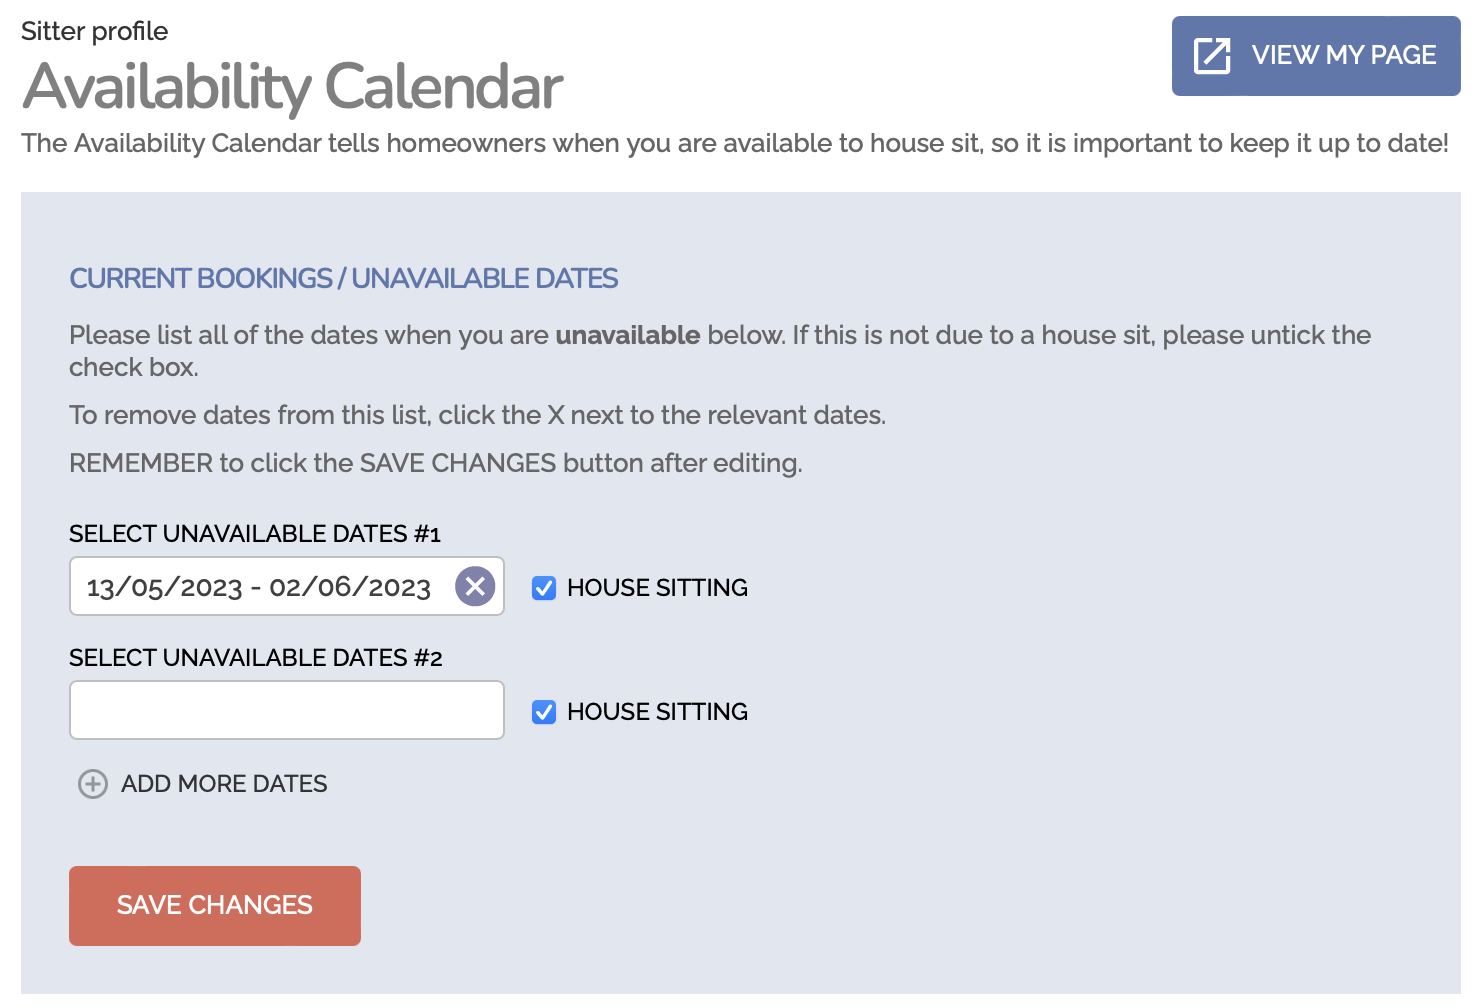 Picture of Availability Calendar for house sitters showing where they can enter their dates to show when they are booked and not available for house sitting jobs. 